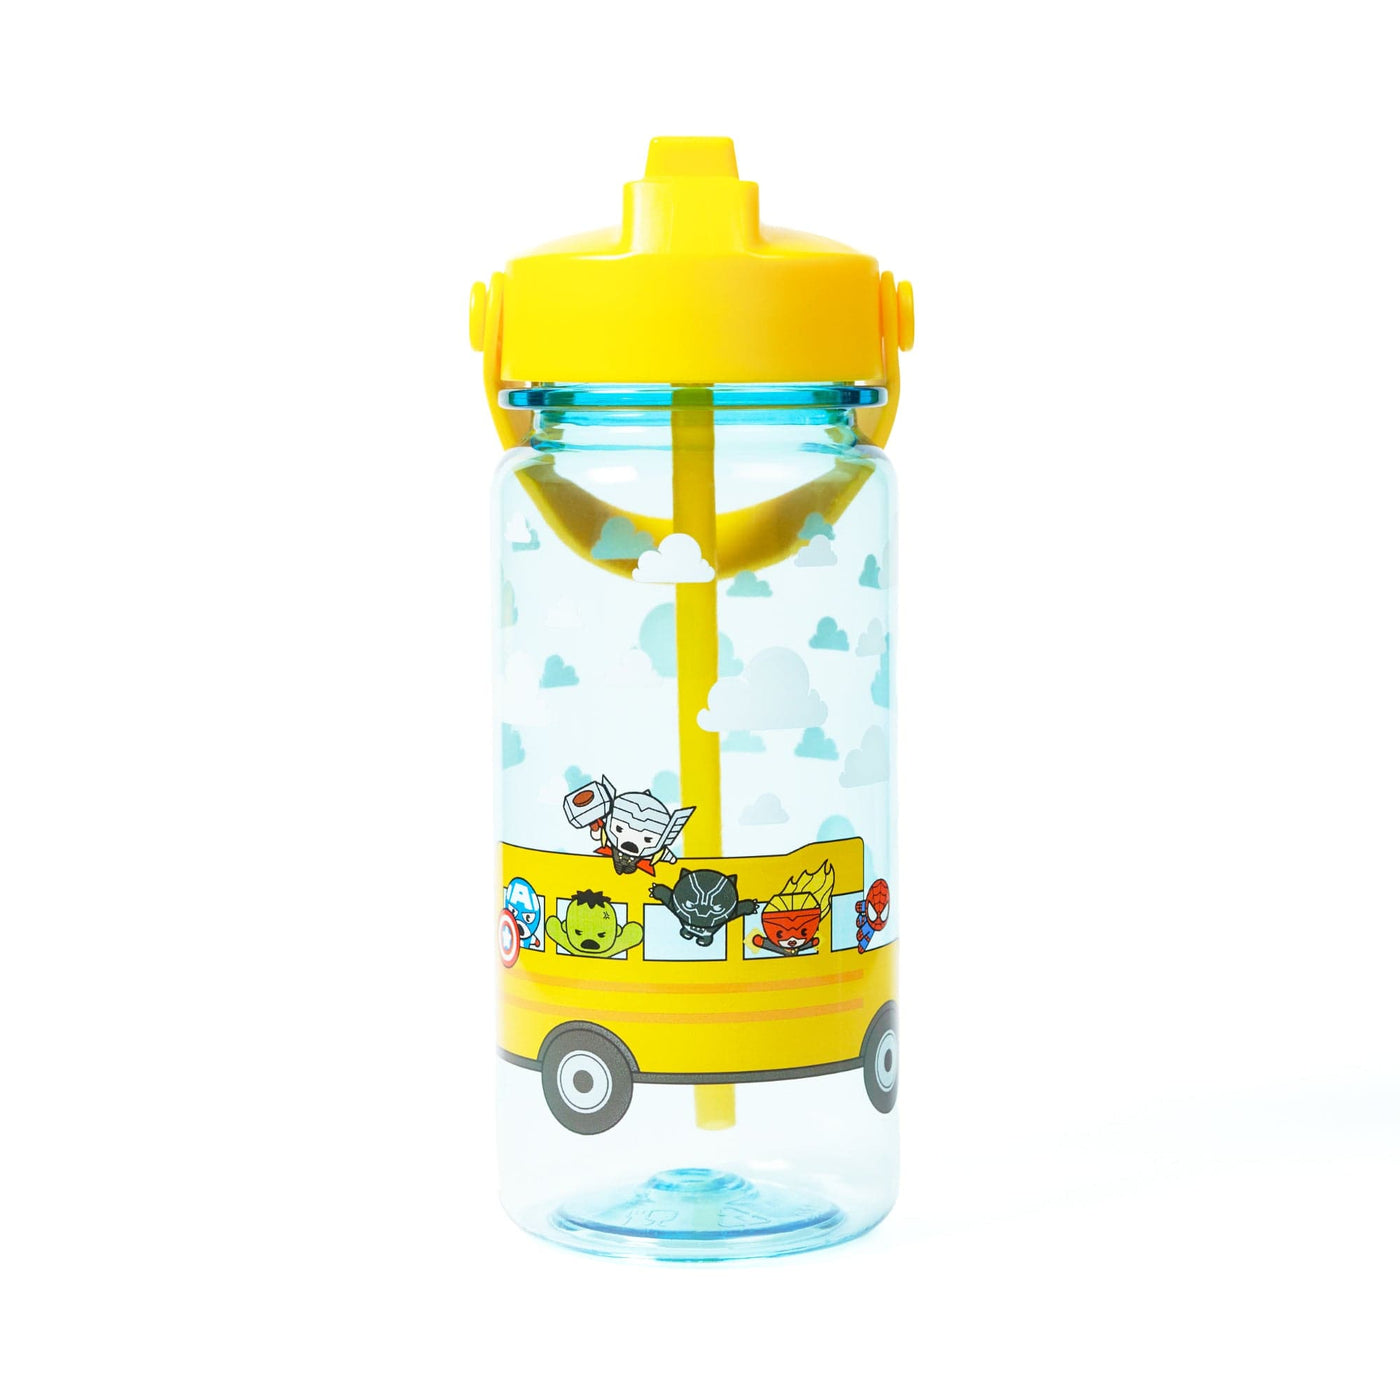 Avengers school bus water bottle with school bus print and Avenger characters in the bus windows